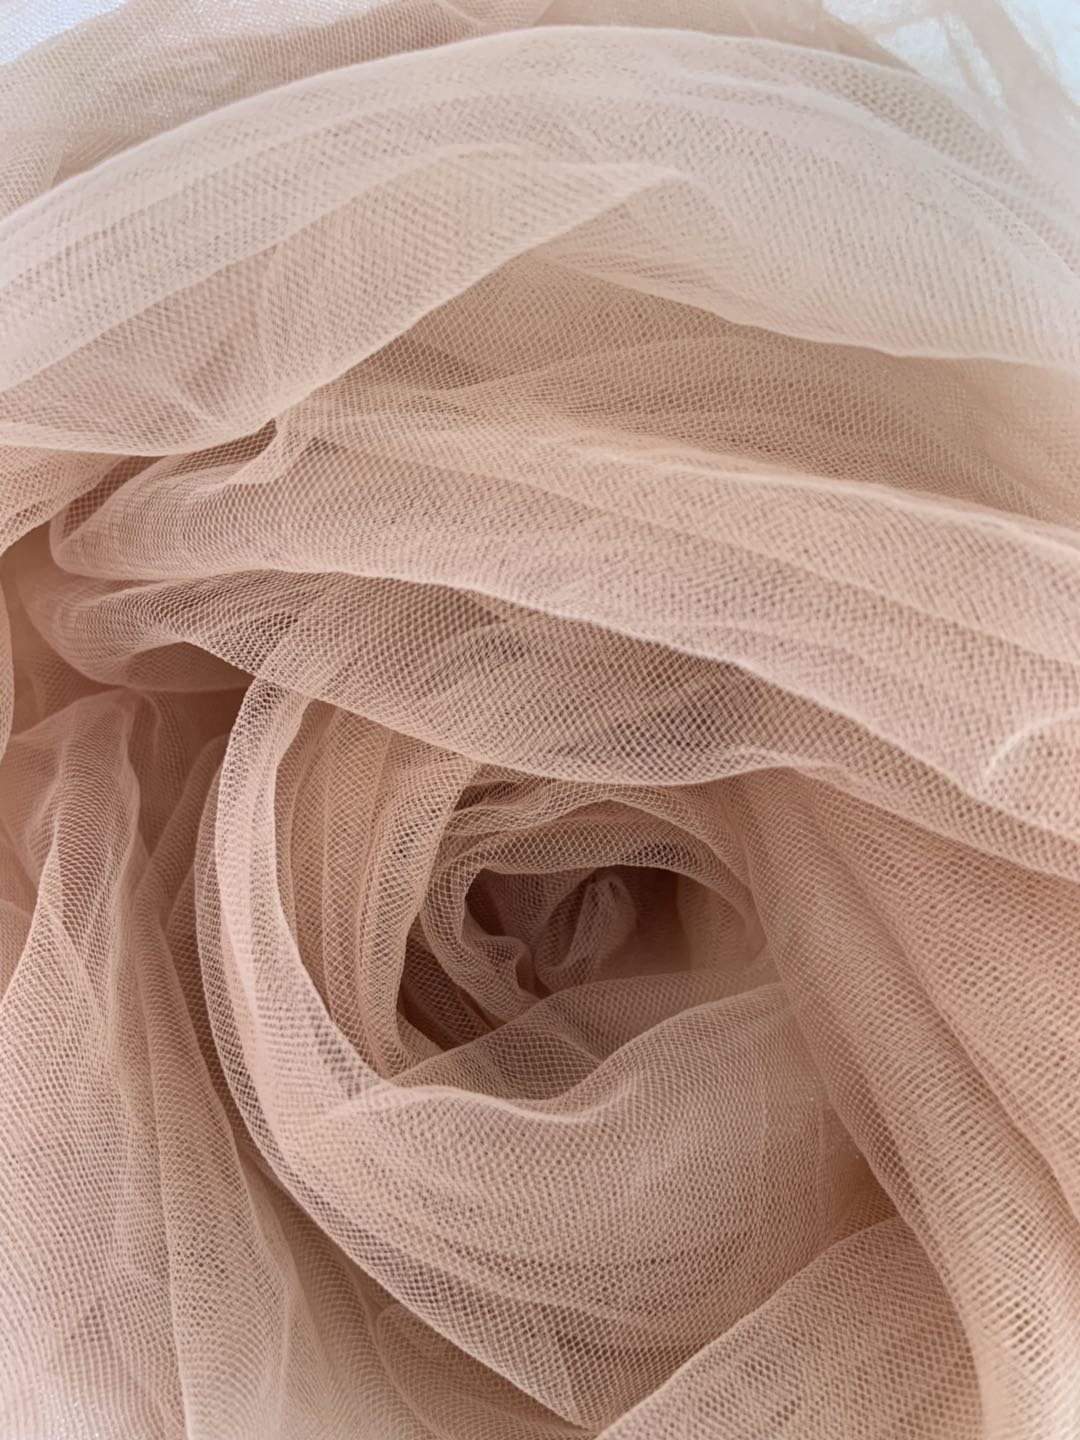 Dusky Muted Pink Soft Tulle Veiling Fabric 150cm wide - by the